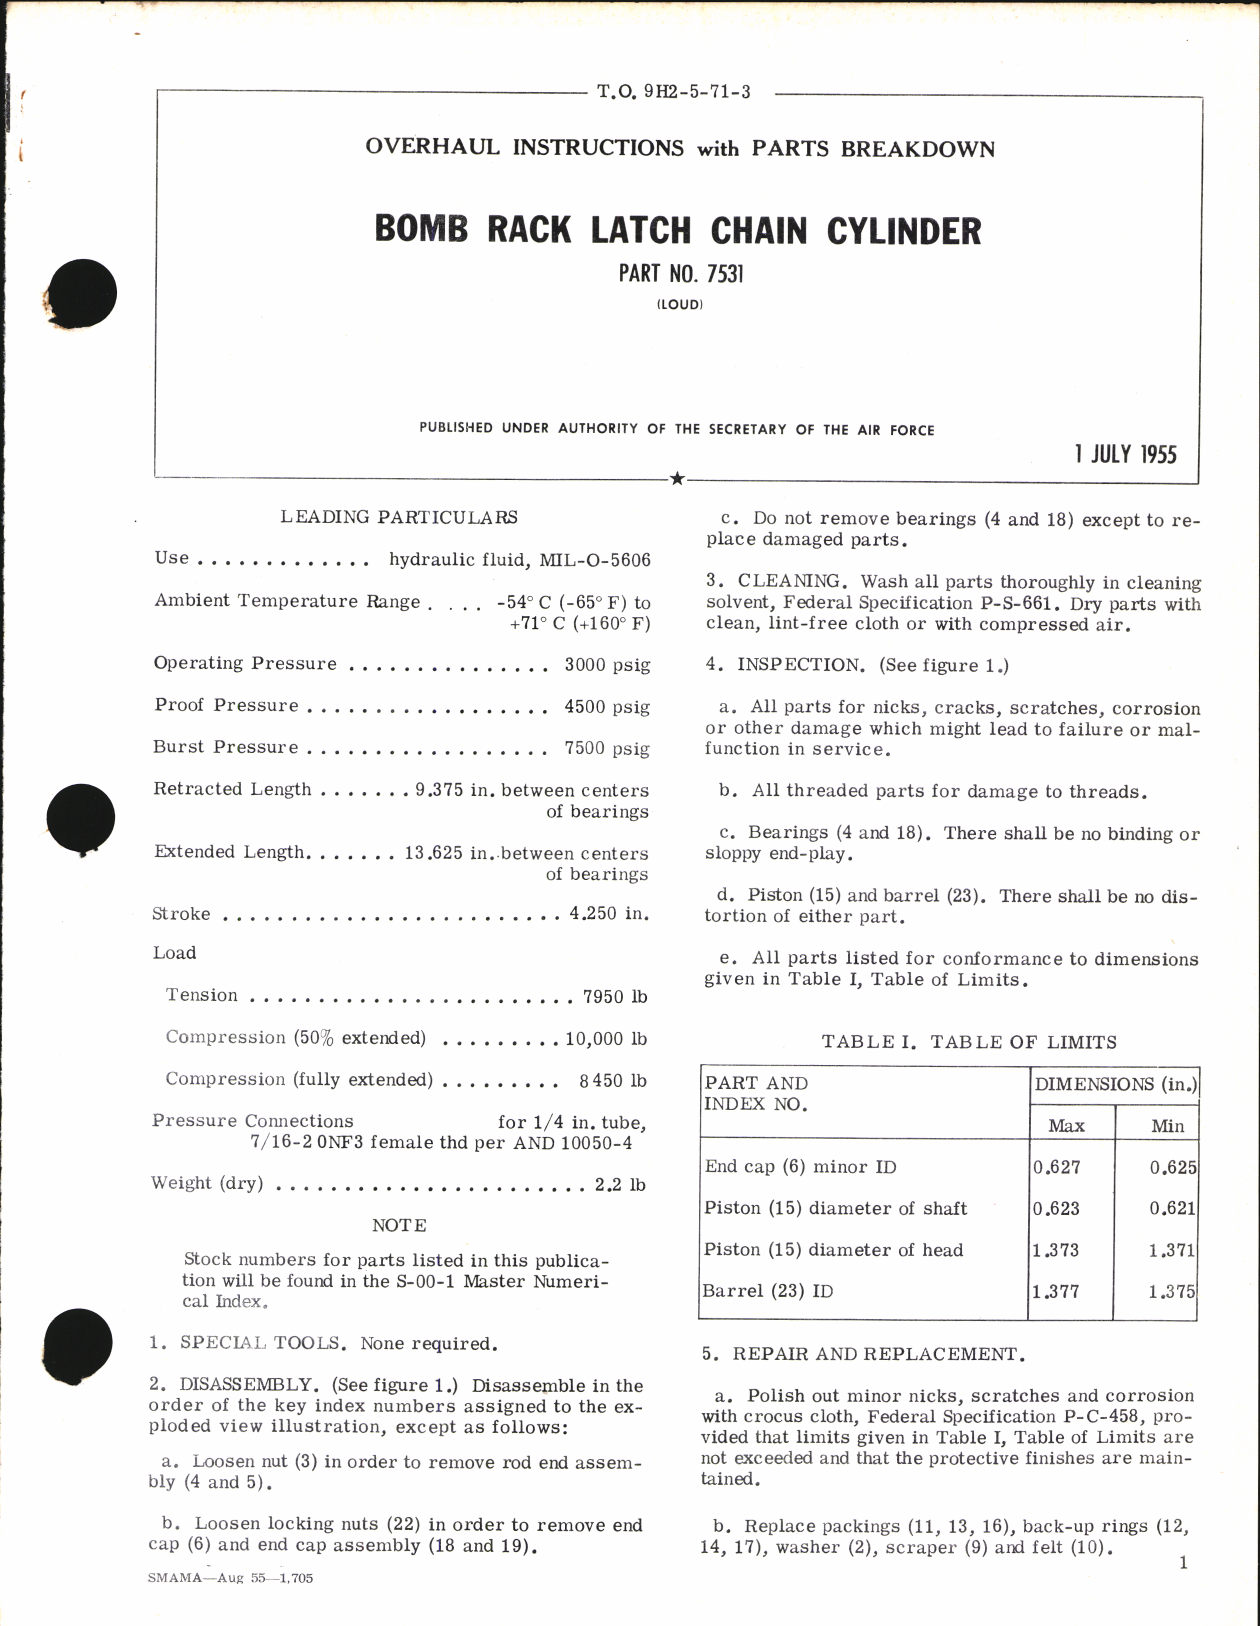 Sample page 1 from AirCorps Library document: Overhaul Instructions with Parts Breakdown for Bomb Rack Latch Chain Cylinder Part No. 7531